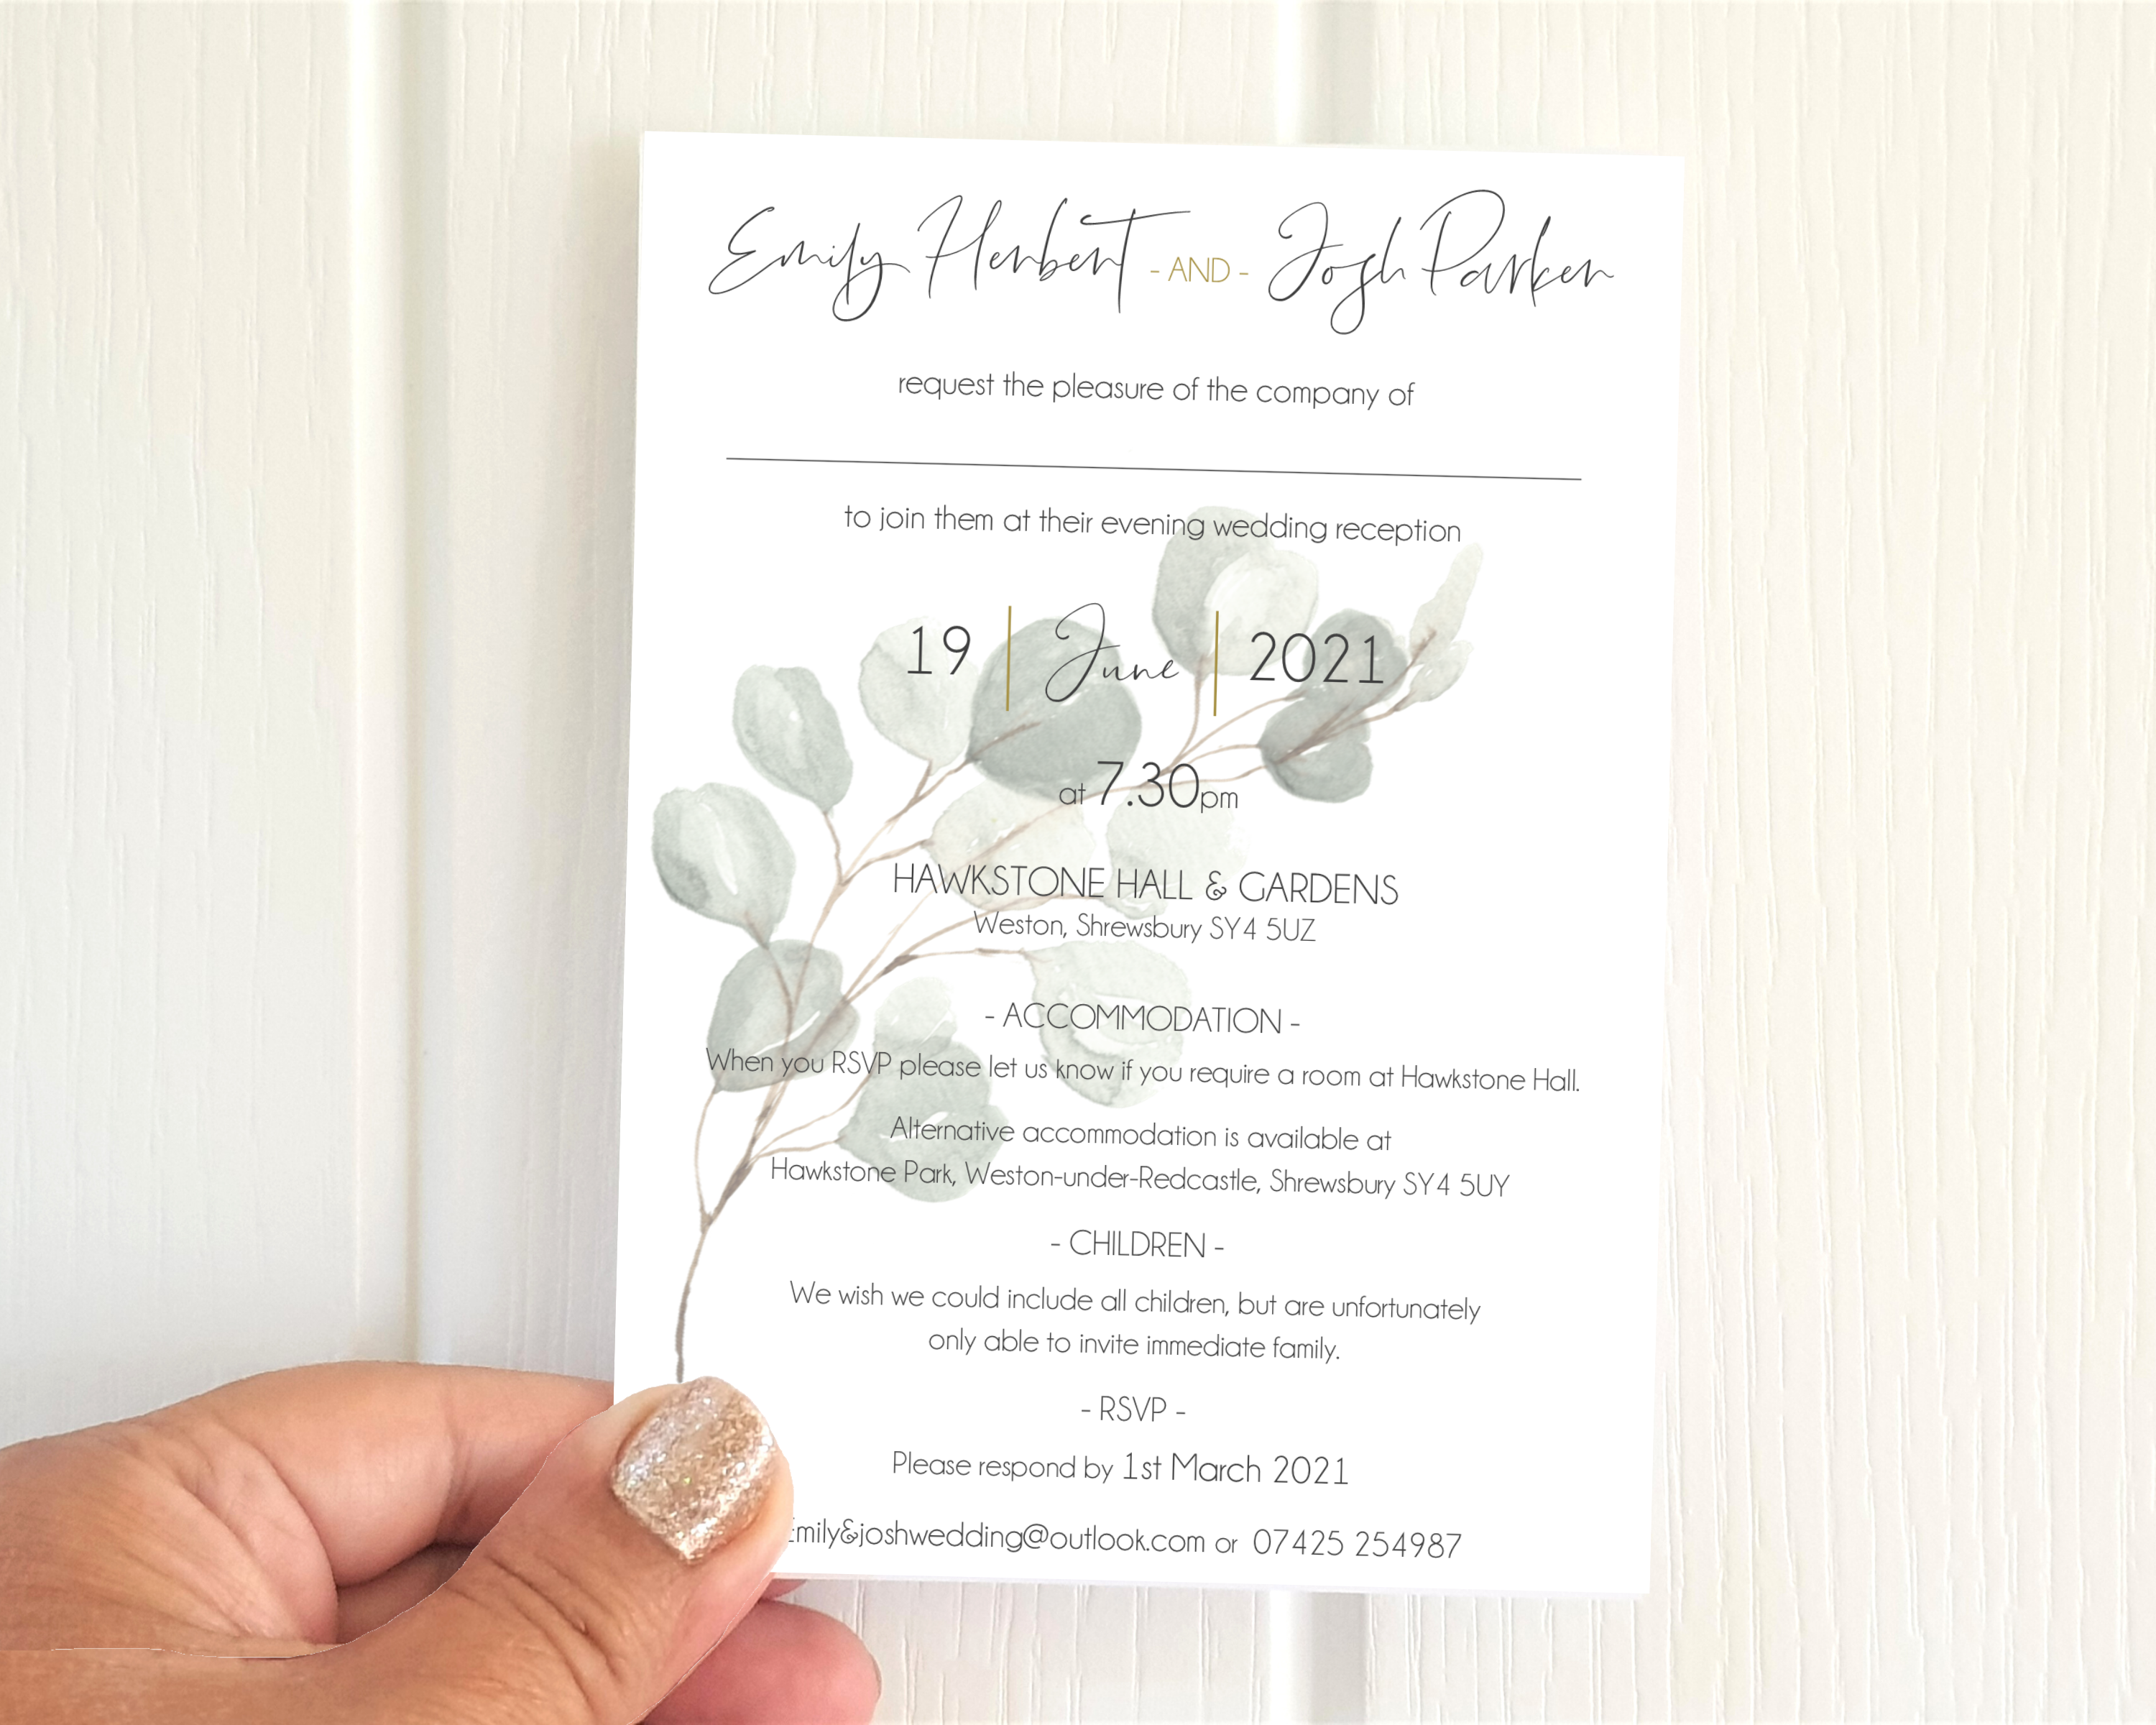 Muted green eucalyptus A6 Poppleberry wedding evening / reception invitation, held up to compare size.